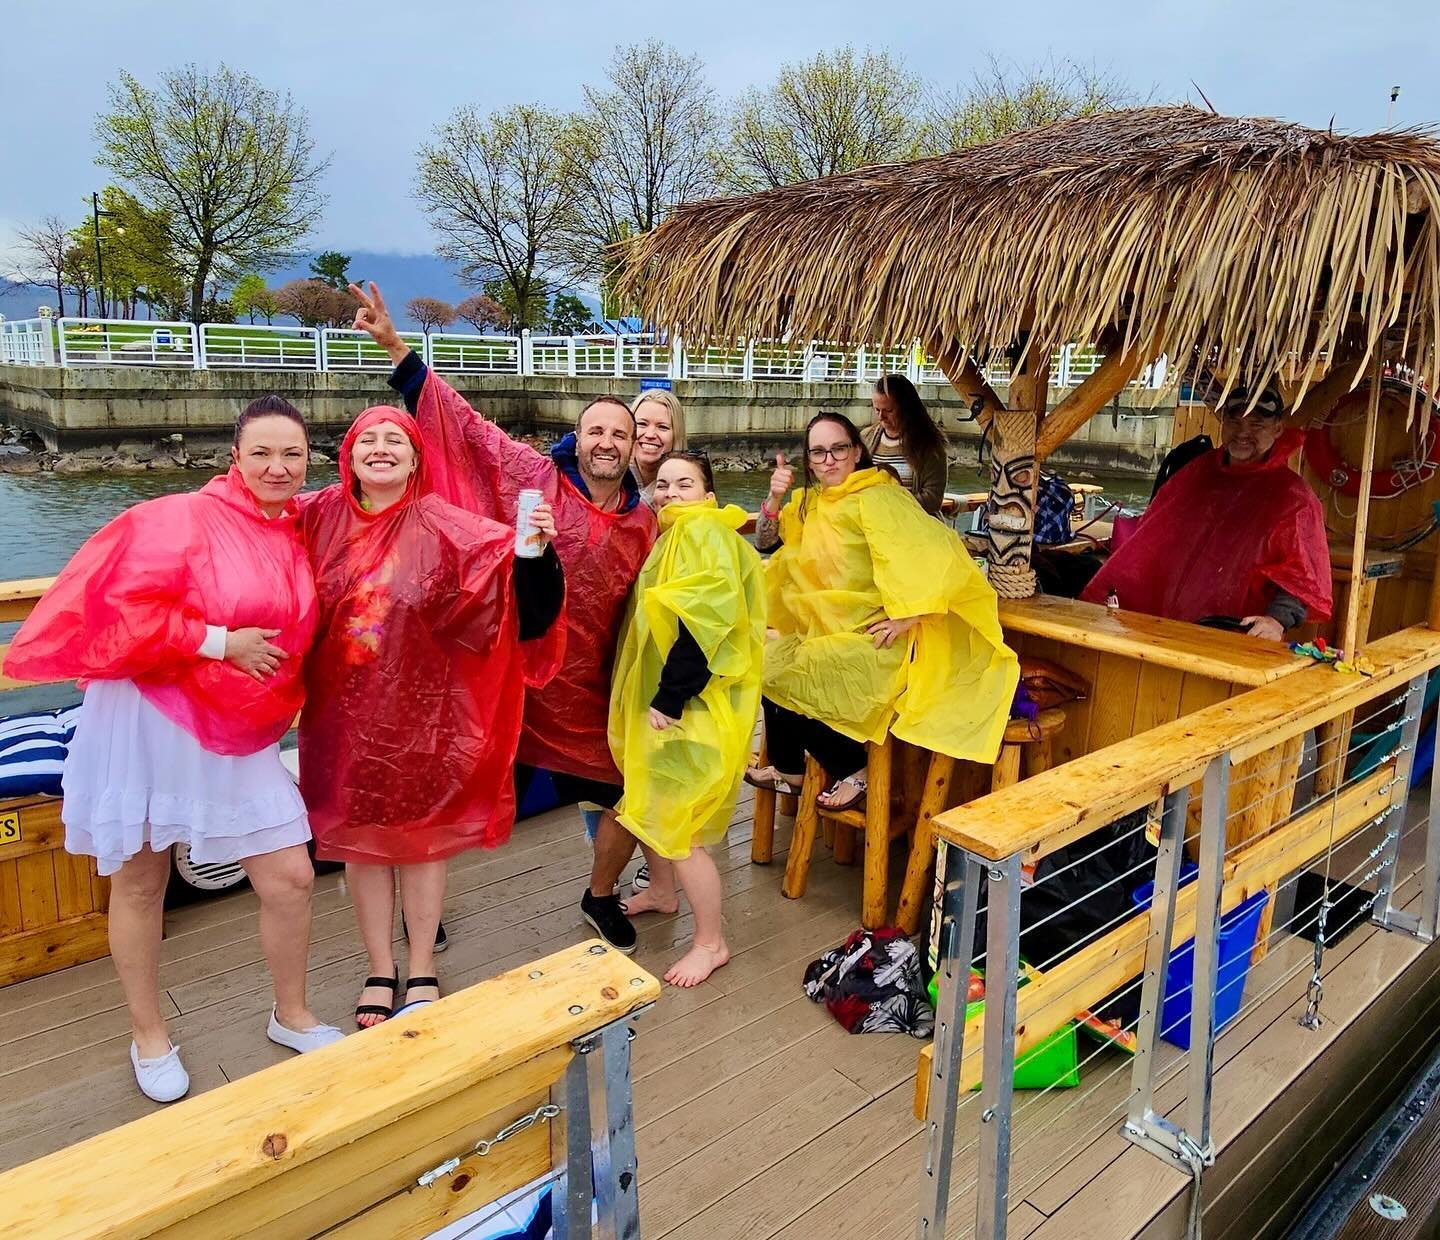 Rain or shine the Tiki Boat&rsquo;s always a good time! ⛈️ 🎊 We didn&rsquo;t let a bit of water dampen our spirits on this Tiki Boat Tour. We&rsquo;re ready for Summer no matter what the weather says. 

#rainparty #okanaganlake #kelownaspring #tikit